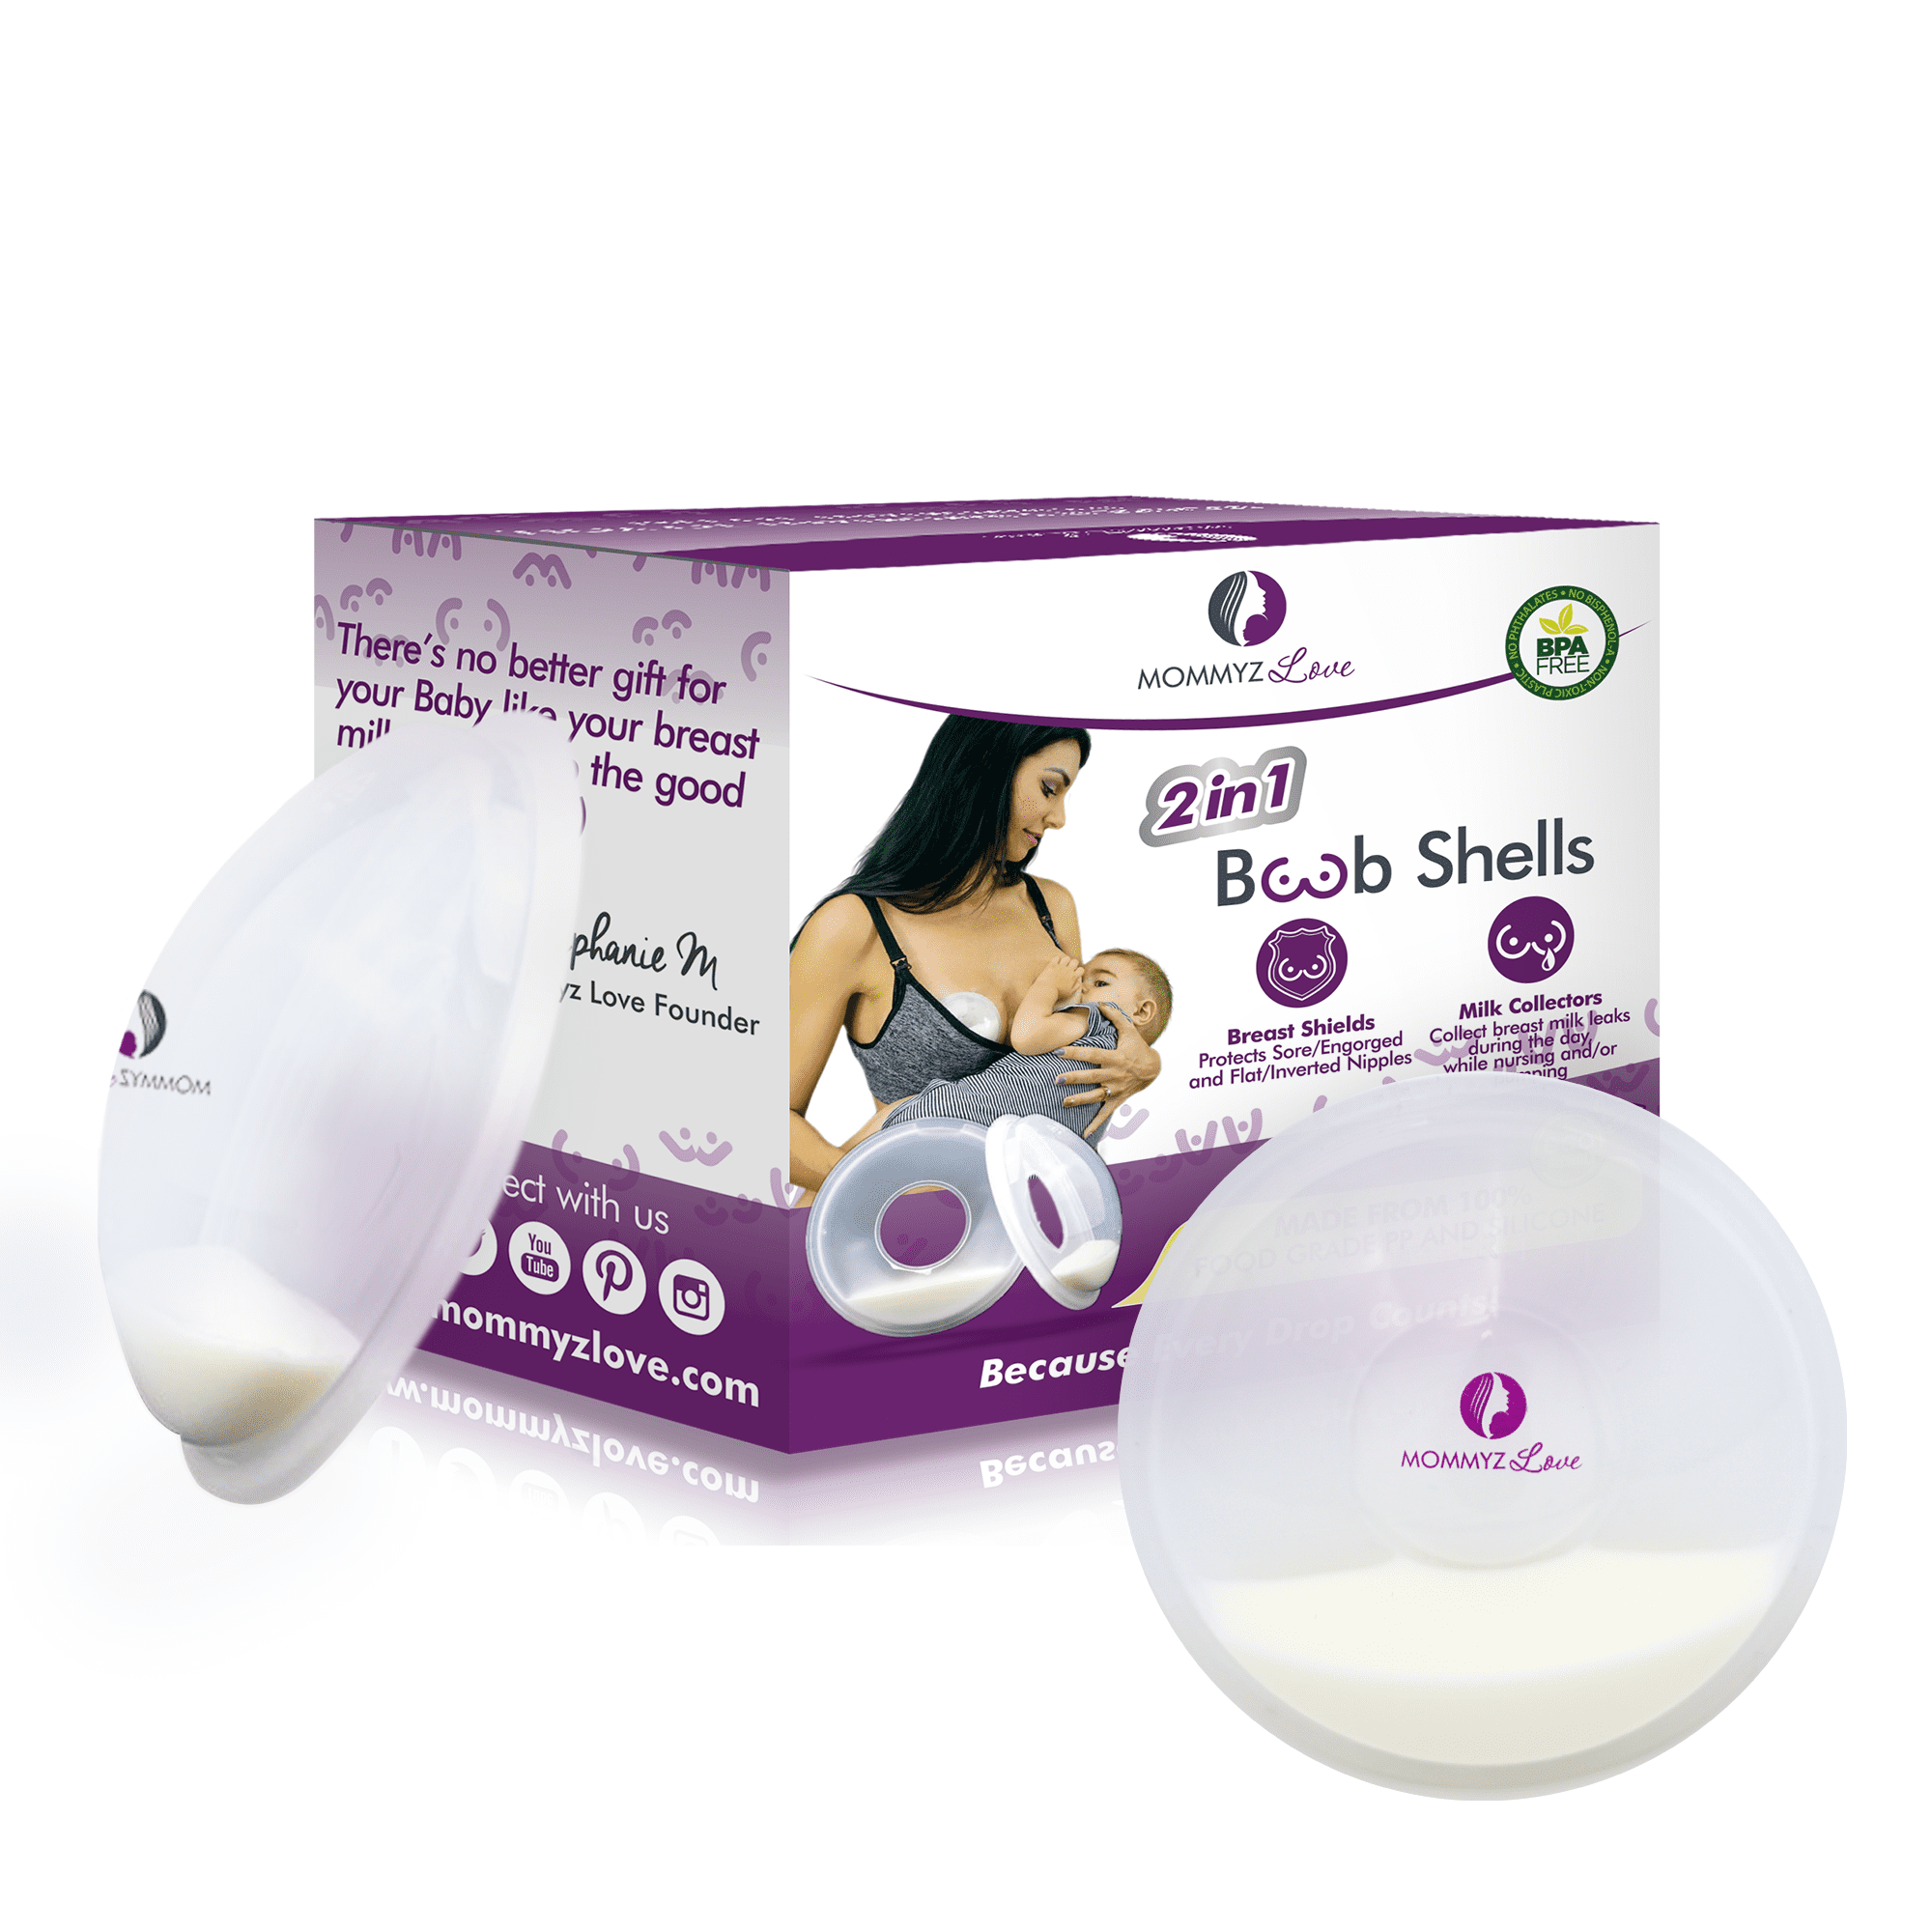 Philips Avent Comfort Breast Shell Set 2 Count 